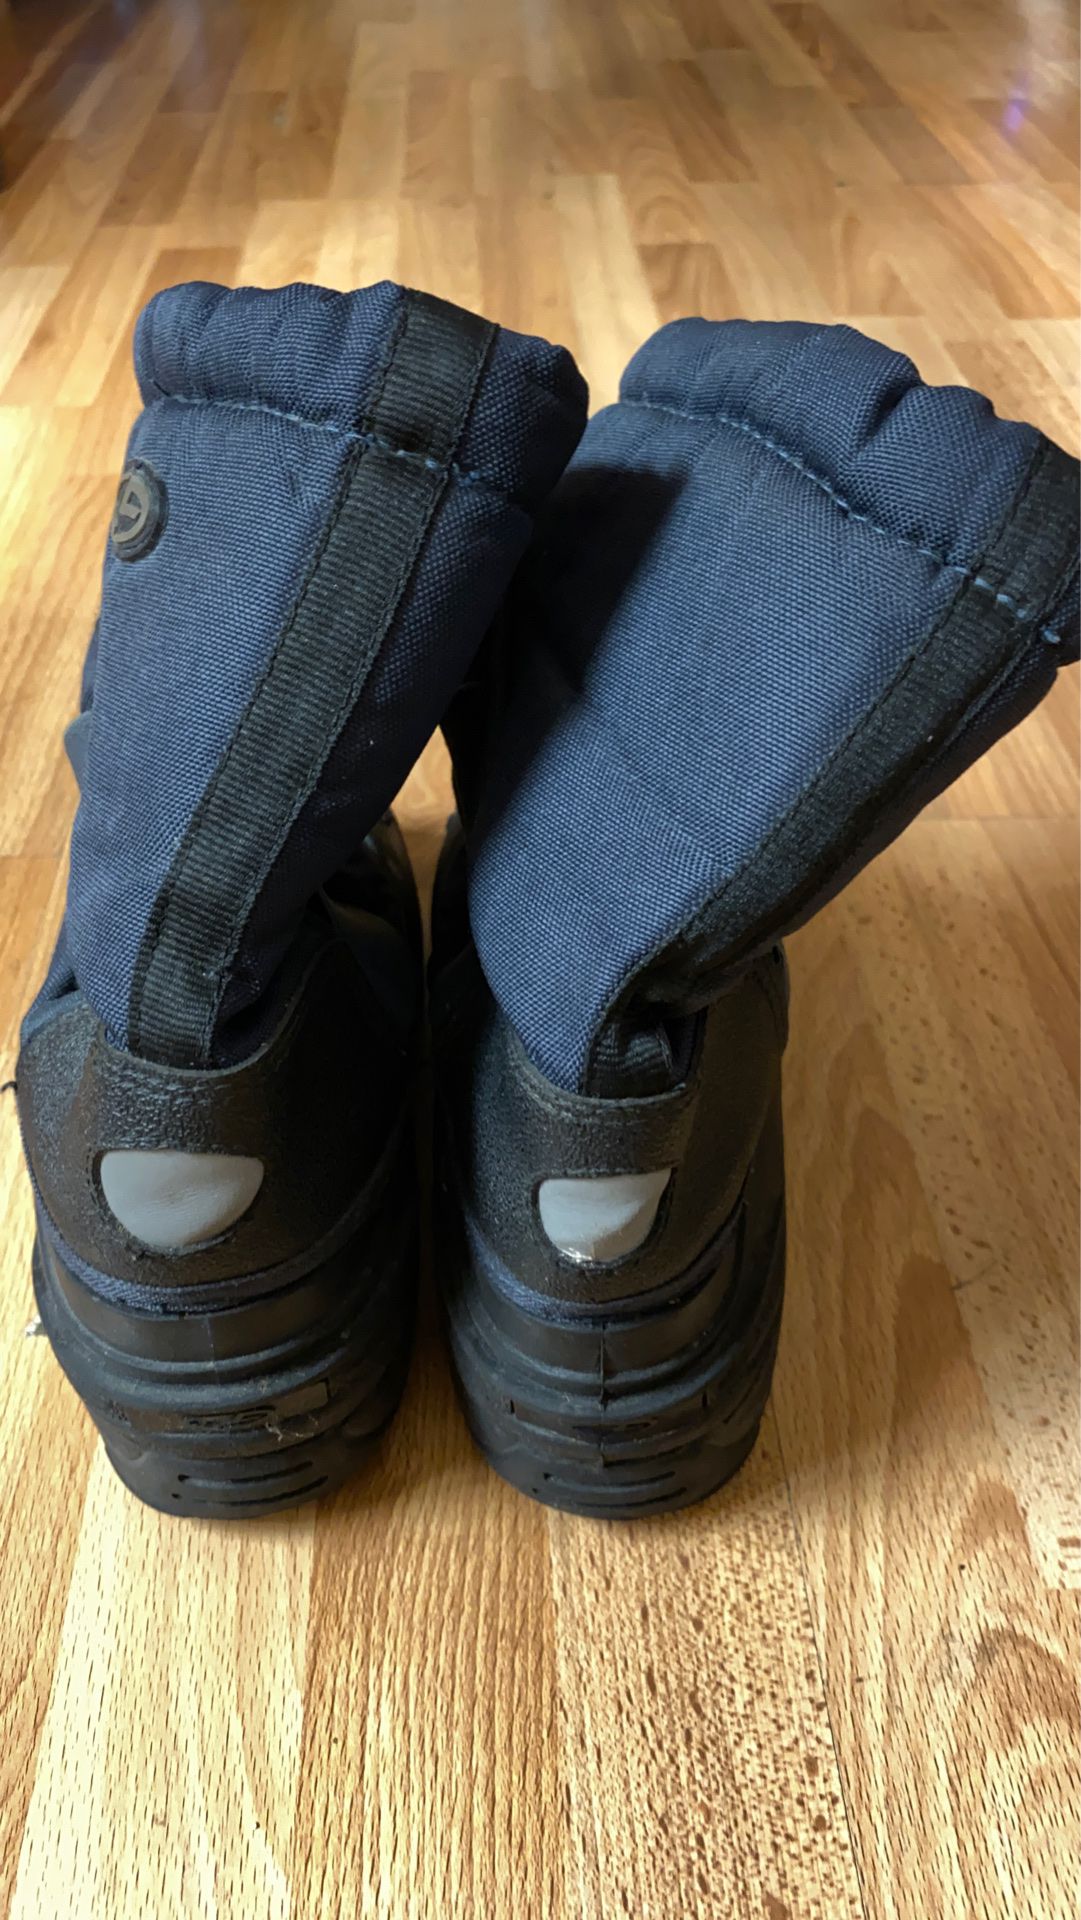 Kids size 1 snow boots Thermolite. Dark blue and black